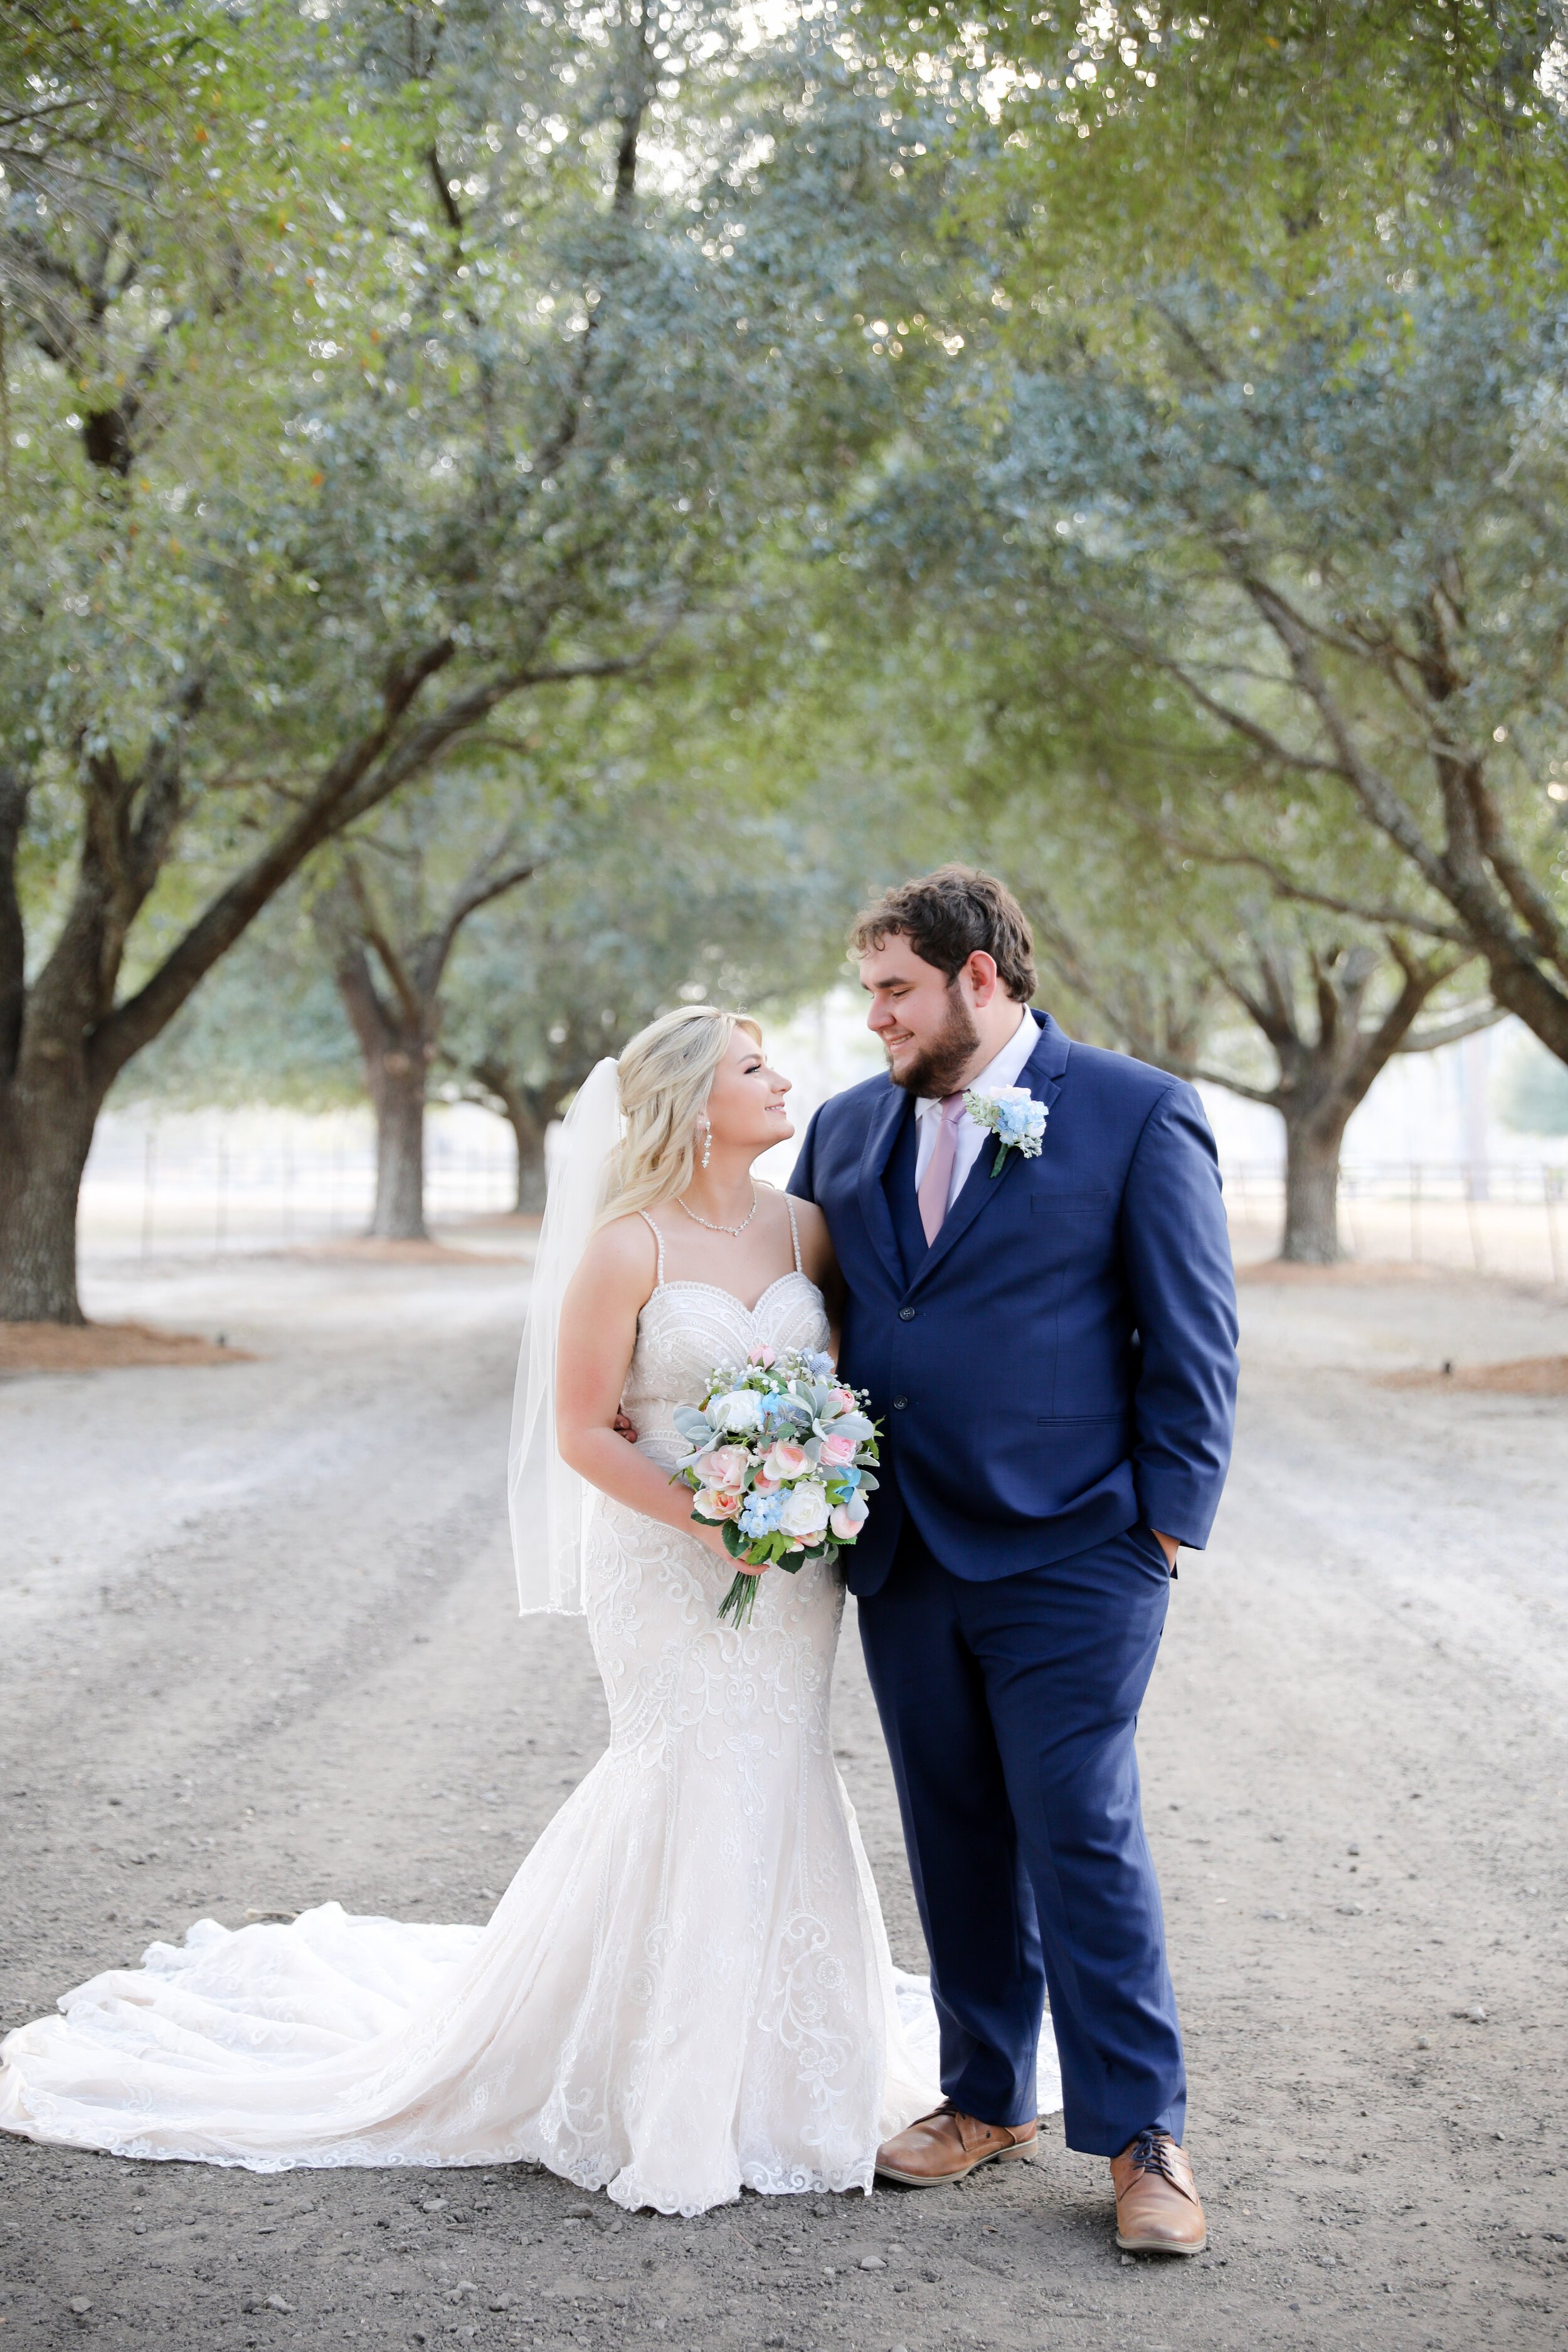 ivory-and-beau-bride-mackenzie-down-for-the-gown-maggie-sottero-wedding-dress-whitney-bridal-gown-wedding-gown-real-bride-blog-wedding-blog-bridal-shop-bridal-boutique-bridal-shopping-savannah-georgia-BrookeCollinsPhotography-347.jpg